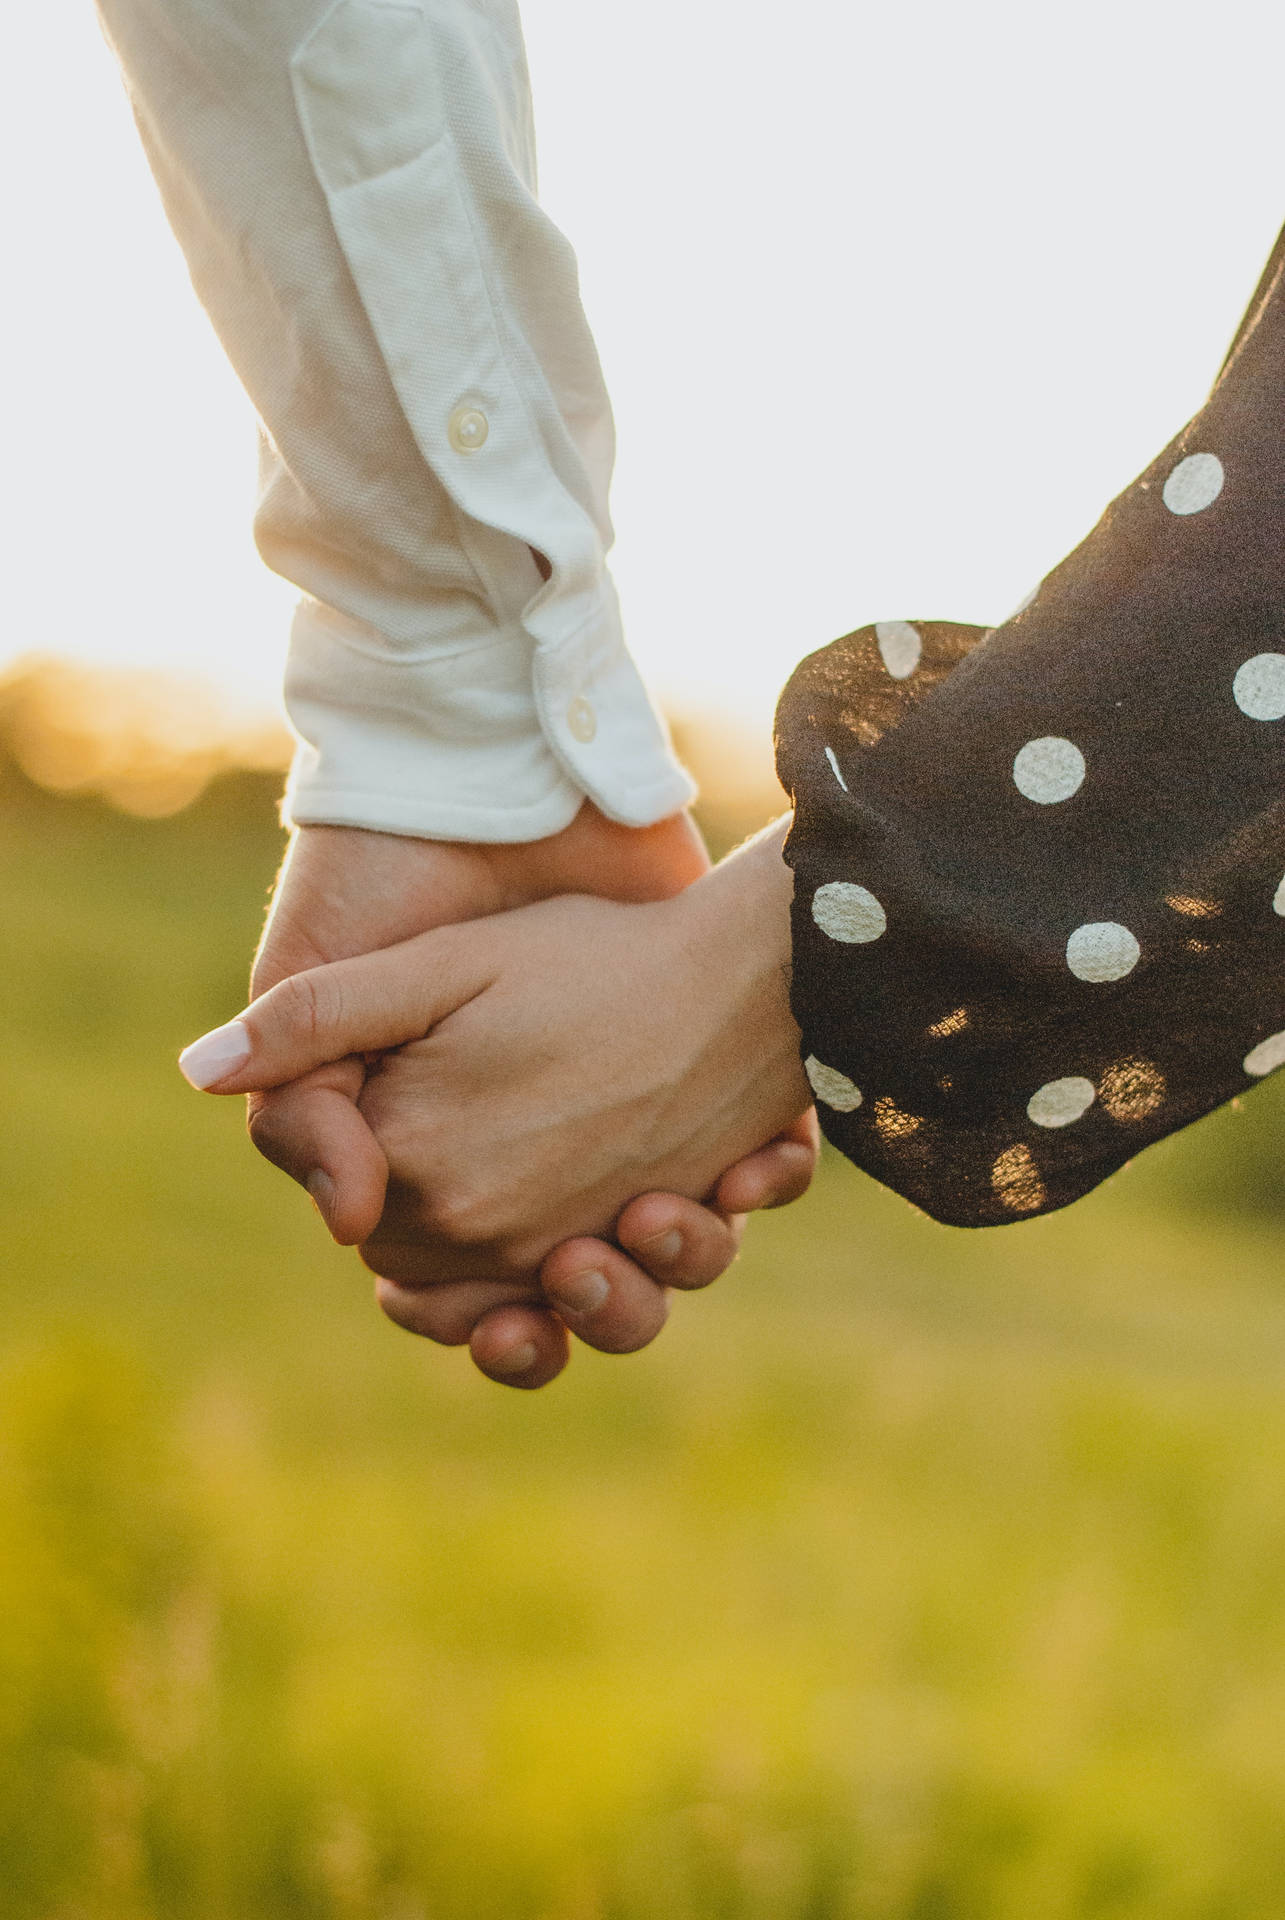 In Love Couples Holding Hands Wallpaper